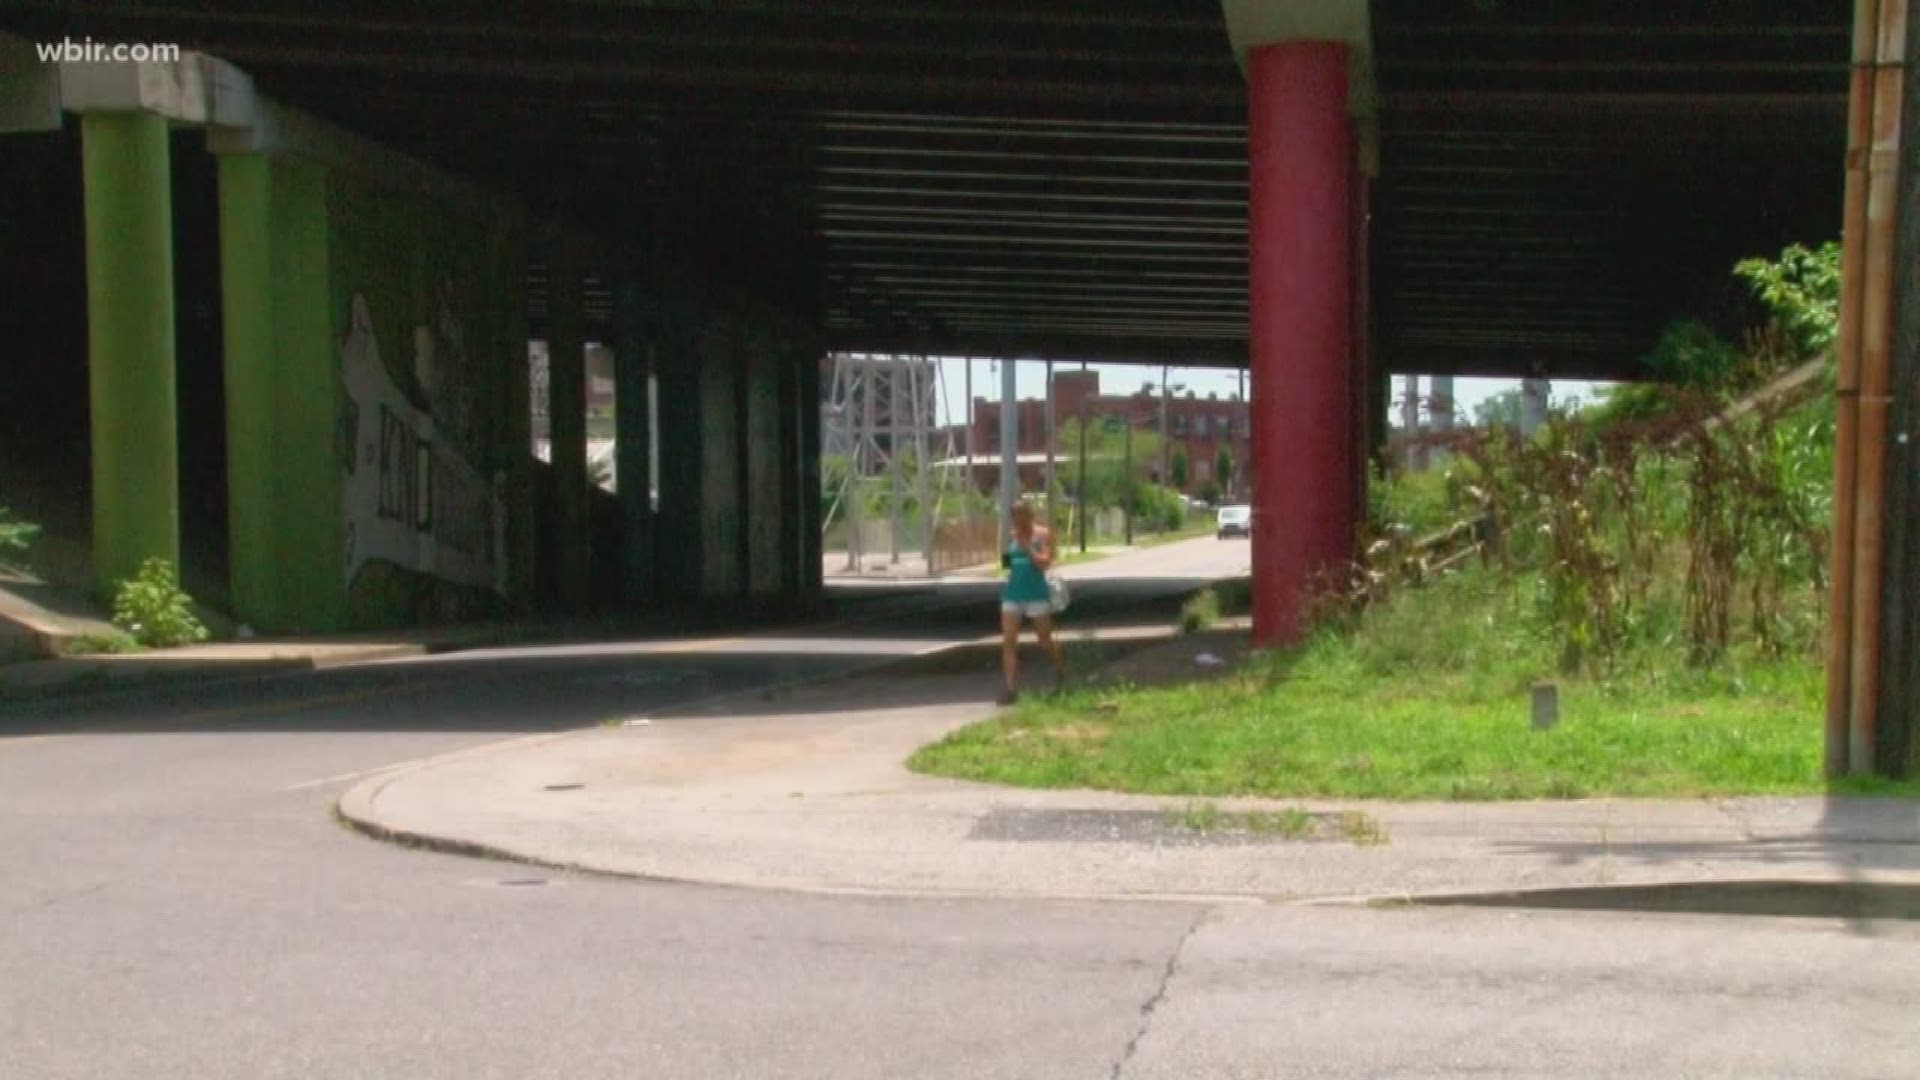 Concerns continue about the Knoxville homeless population after a North Knoxville woman says someone took a table from her porch and she found it next to a woman sleeping under the 6th Avenue Bridge.